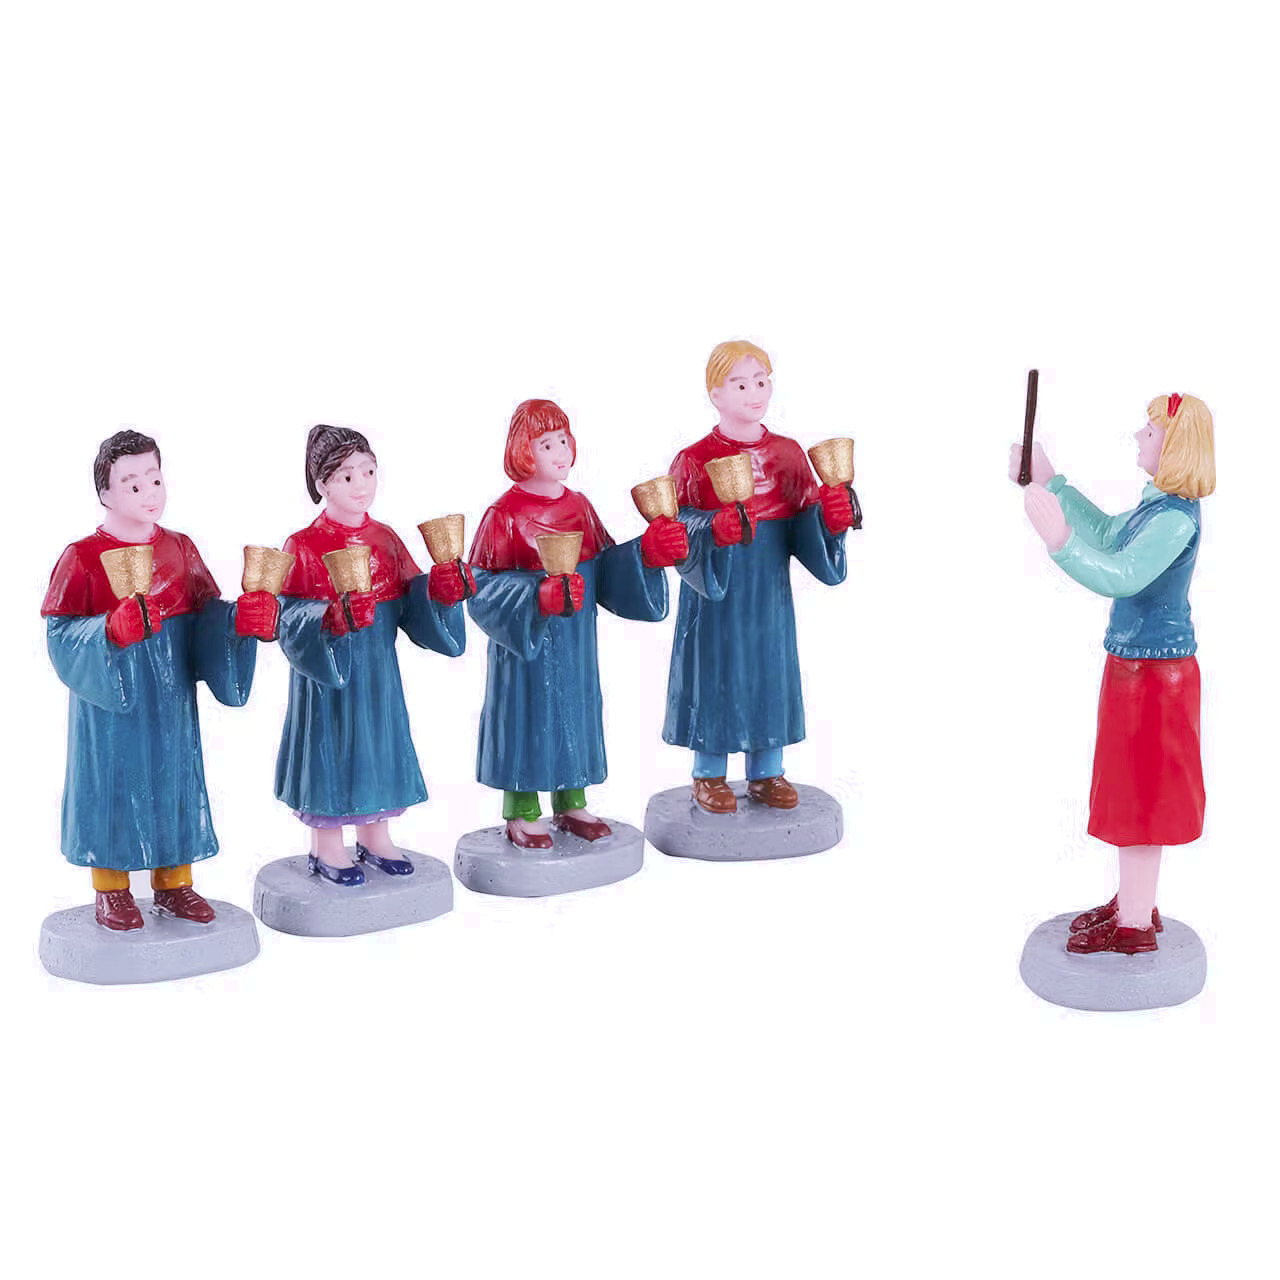 Lemax 2021 Handbell Choir General Products #12020 Holiday Cheer Red Blue Gowns